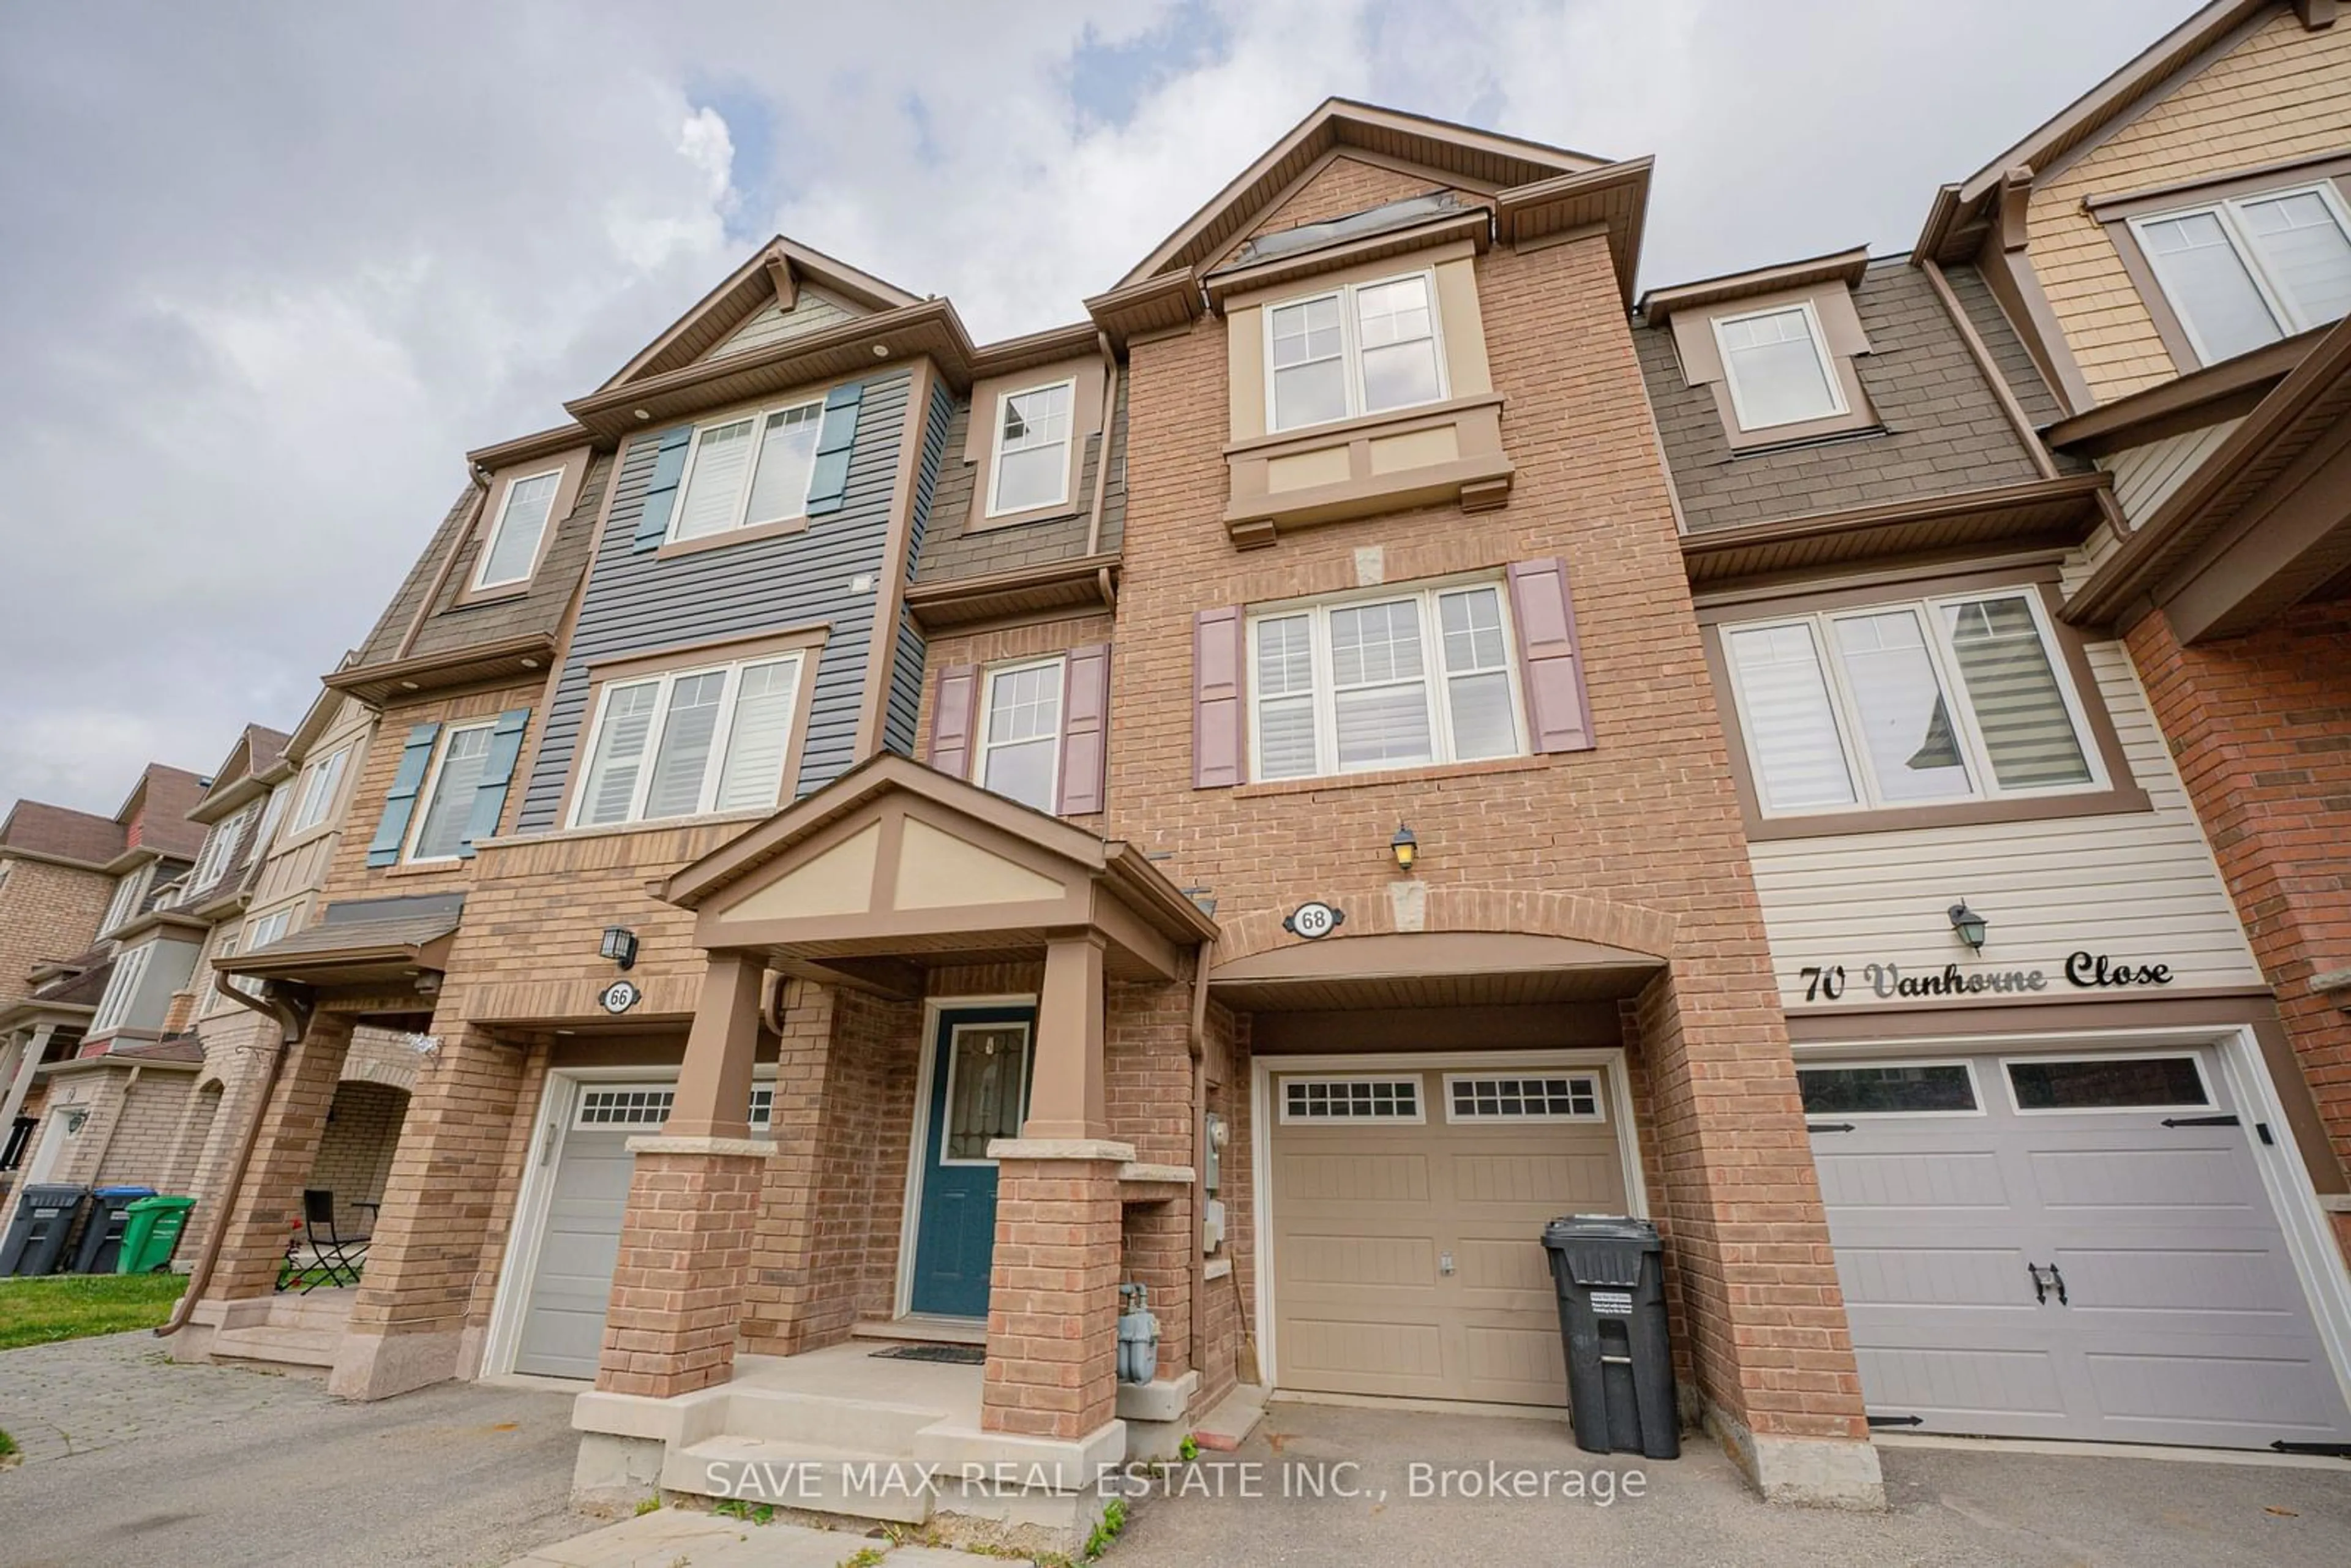 A pic from exterior of the house or condo for 68 Vanhorne Clse, Brampton Ontario L7A 0X8